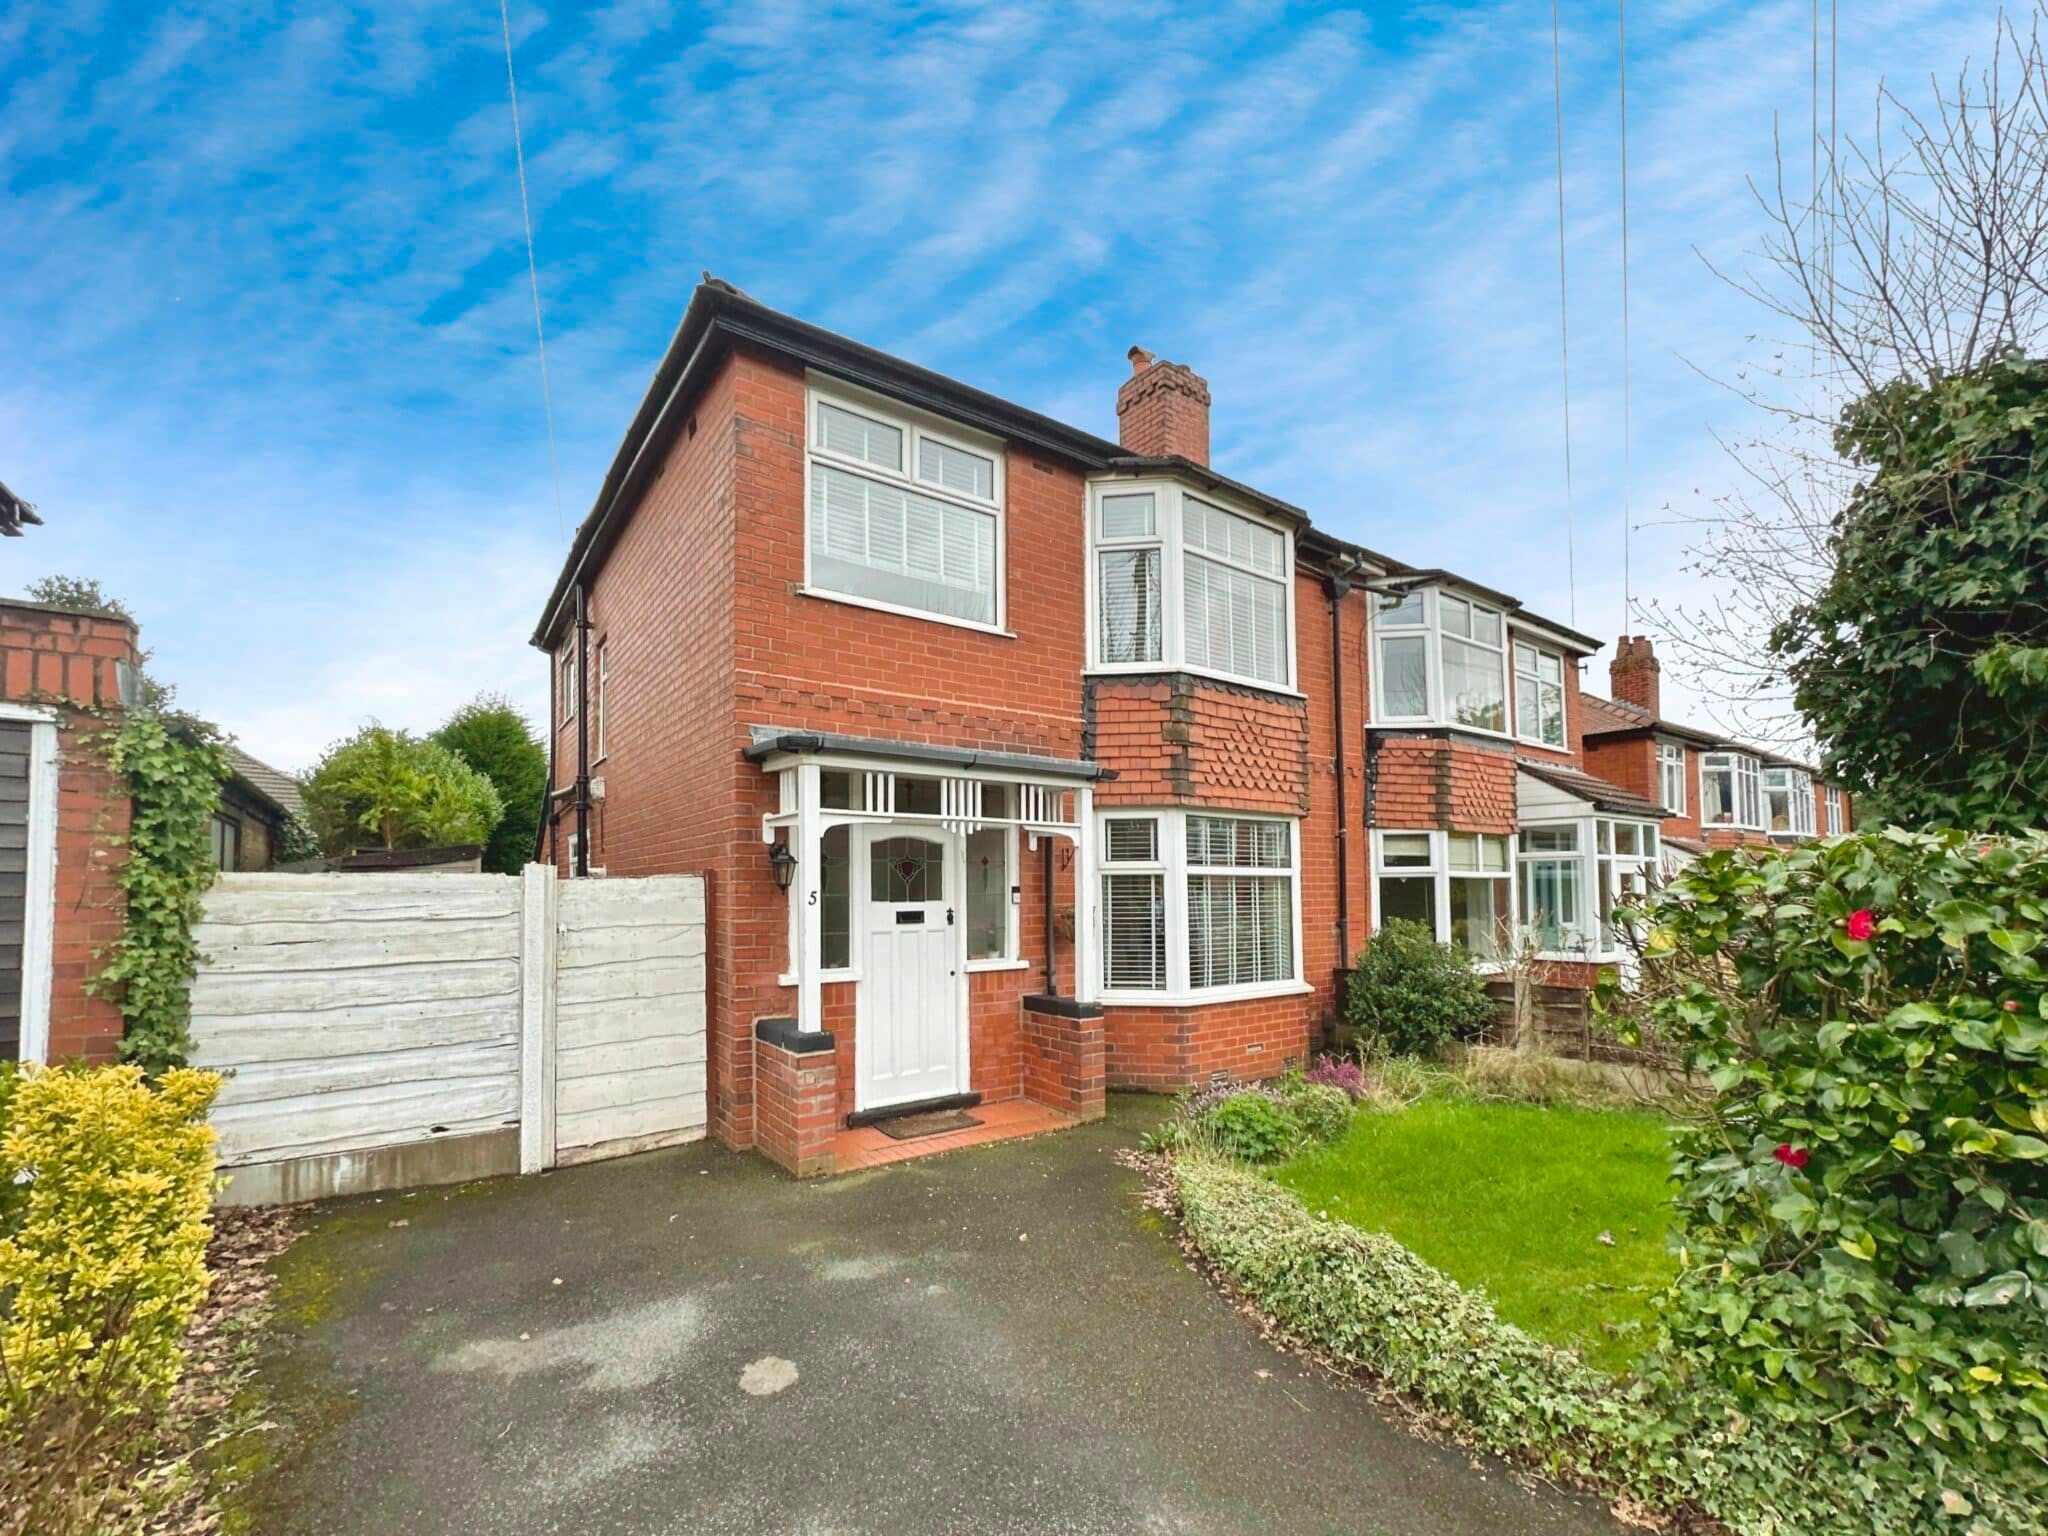 Clive Avenue, Whitefield, Manchester, M45 7WS